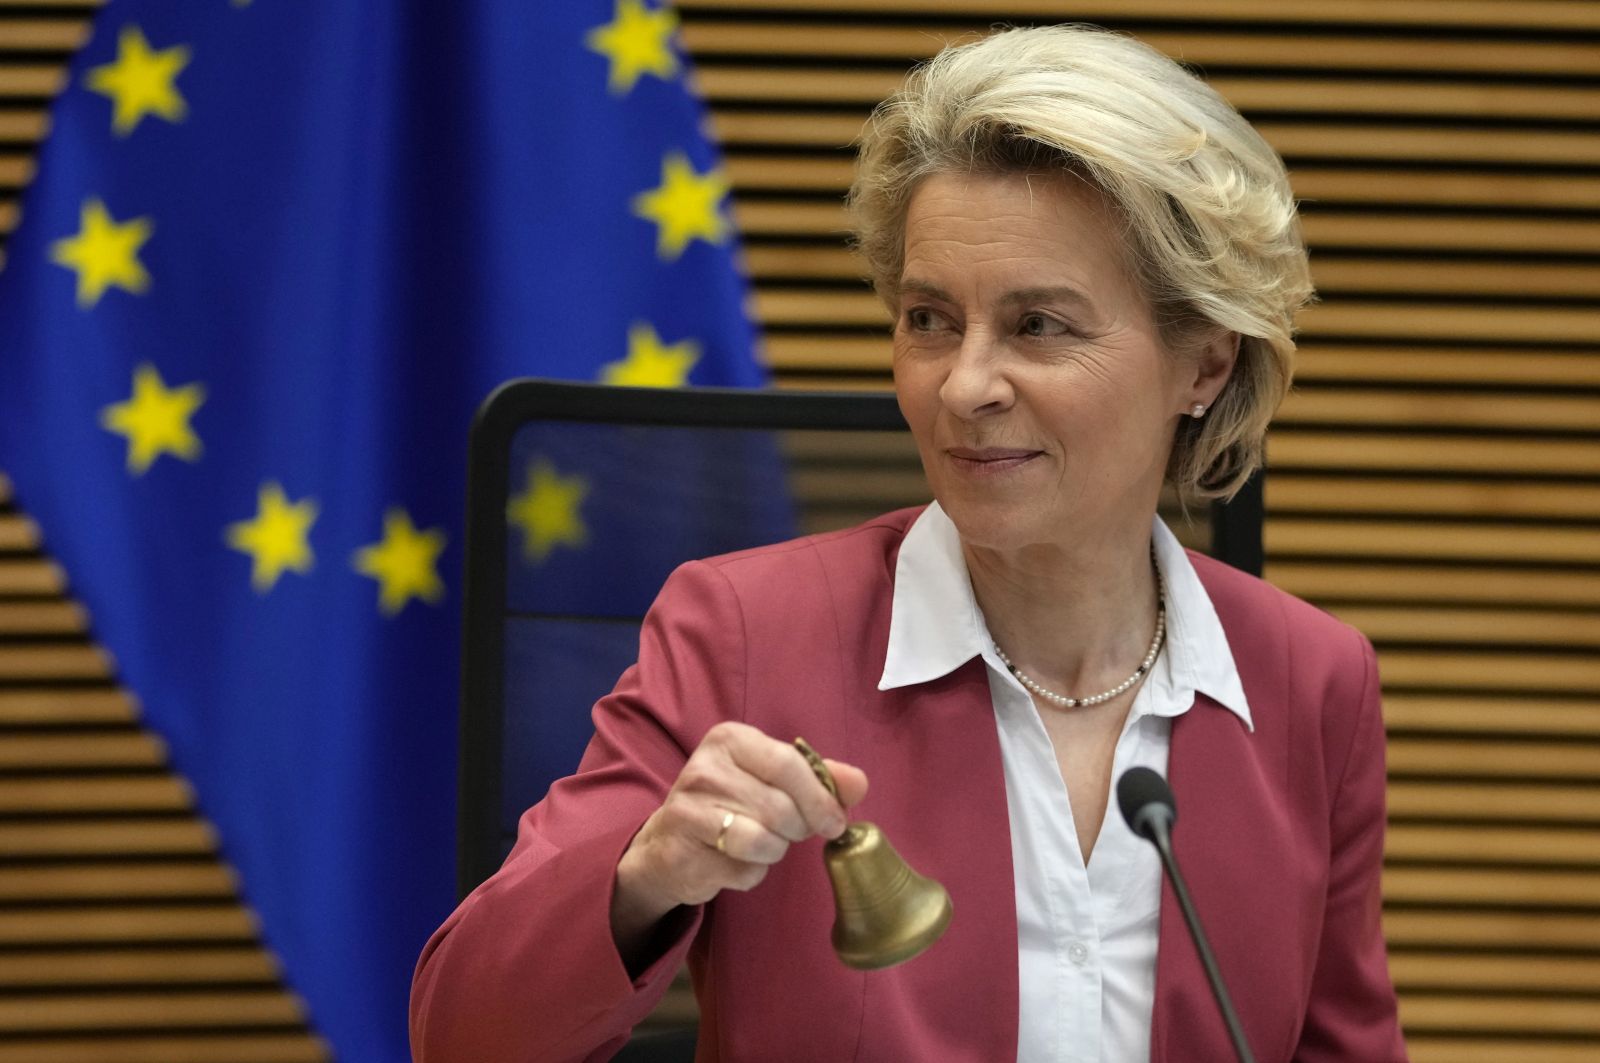 epa09737643 European Commission President Ursula von der Leyen rings a bell to signal the start of a meeting of the College of Commissioners at EU headquarters in Brussels, Belgium, 08 February 2022. The European Union is to publish proposals for its European Chips Act on 08 February.  EPA/VIRGINIA MAYO / POOL